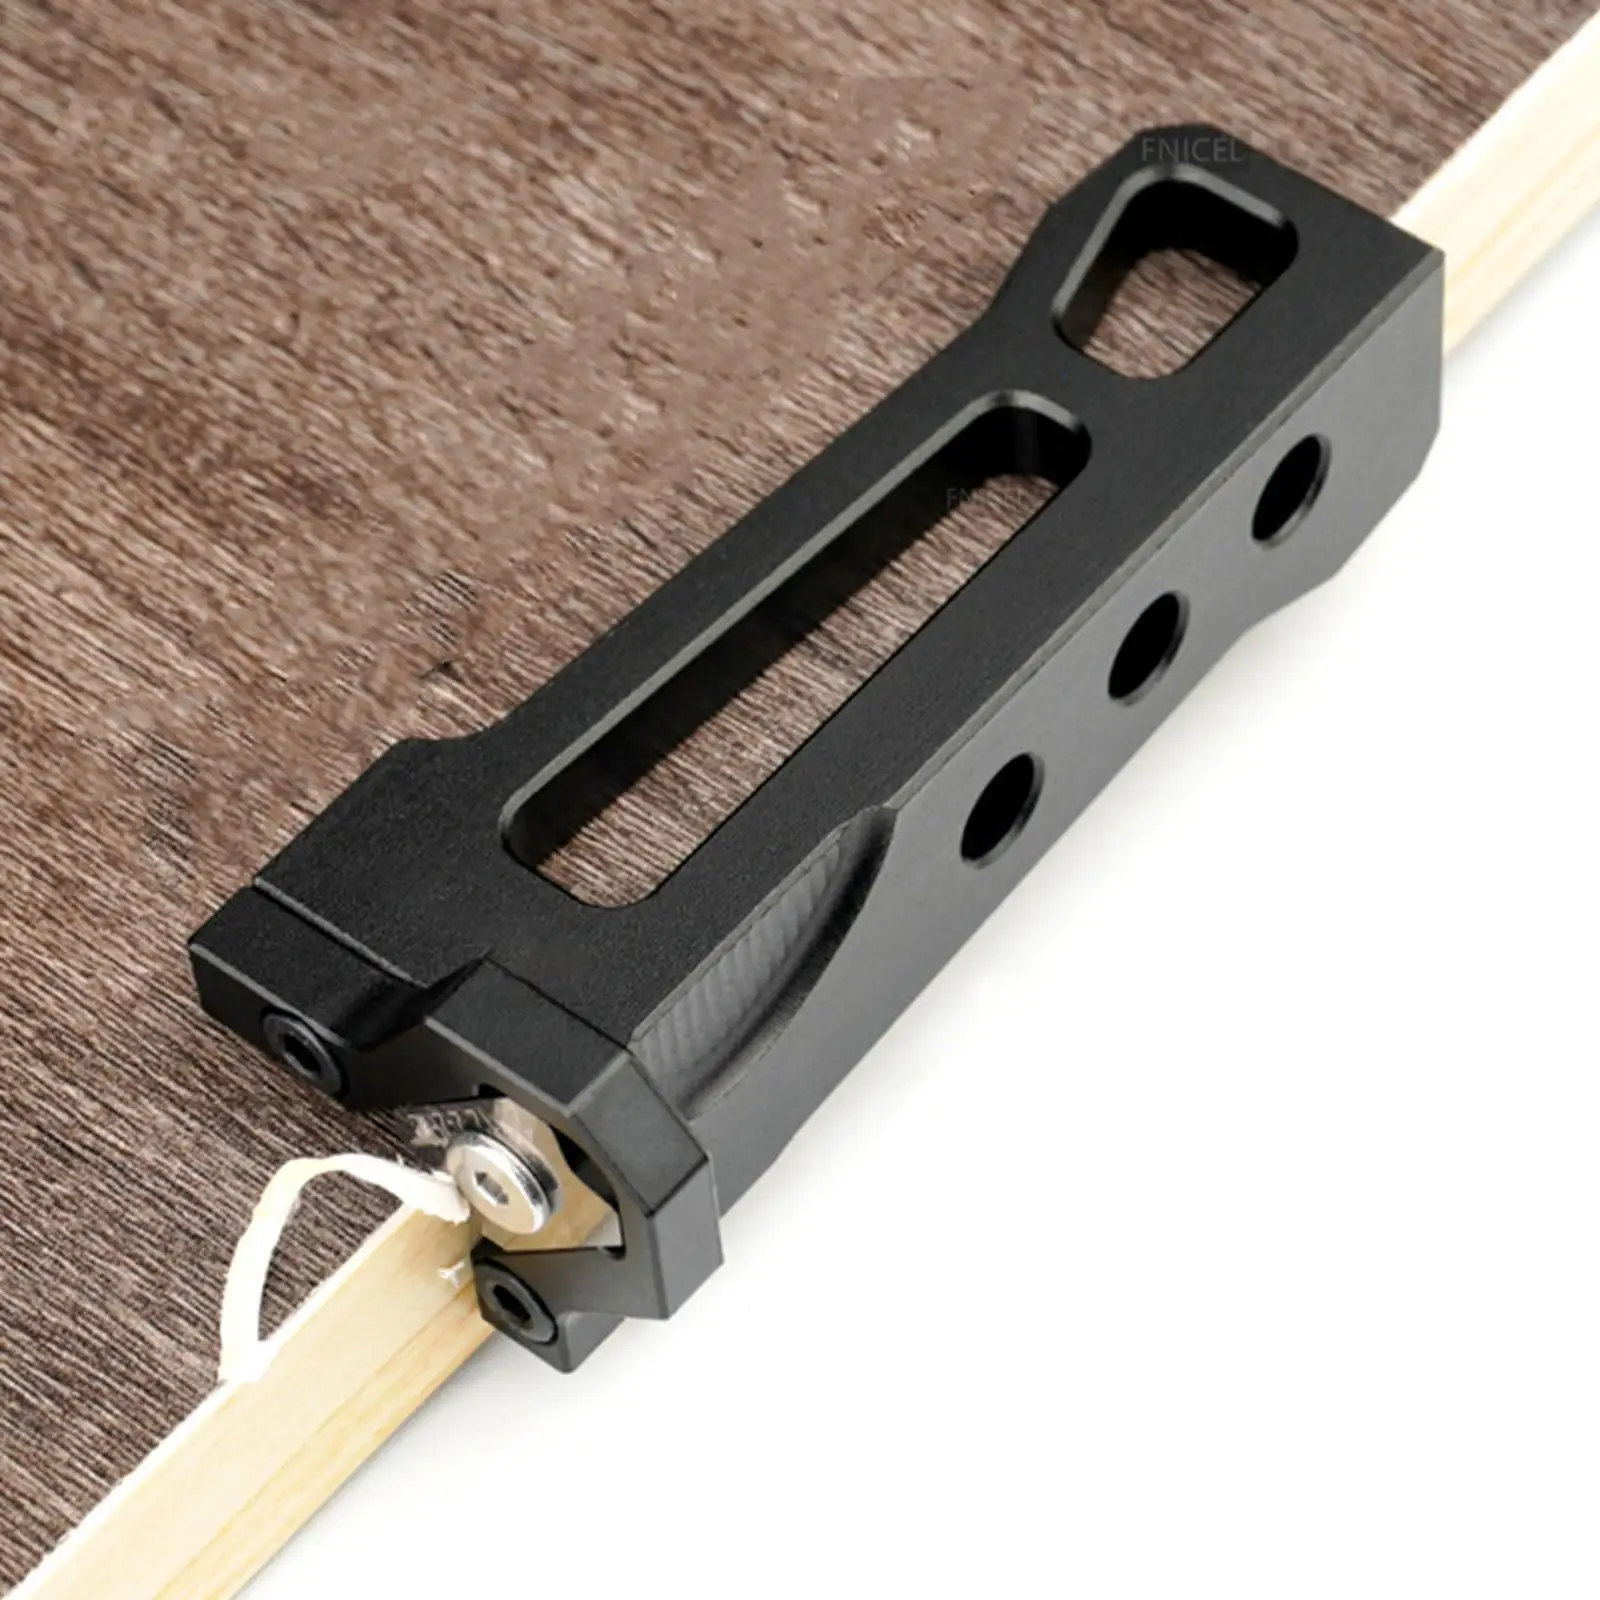 Mini Woodworking Edge Trimmer Deburring Tool Woodcraft Tool, Router Equipment Board Edge Planing for Woodworkers Gifts